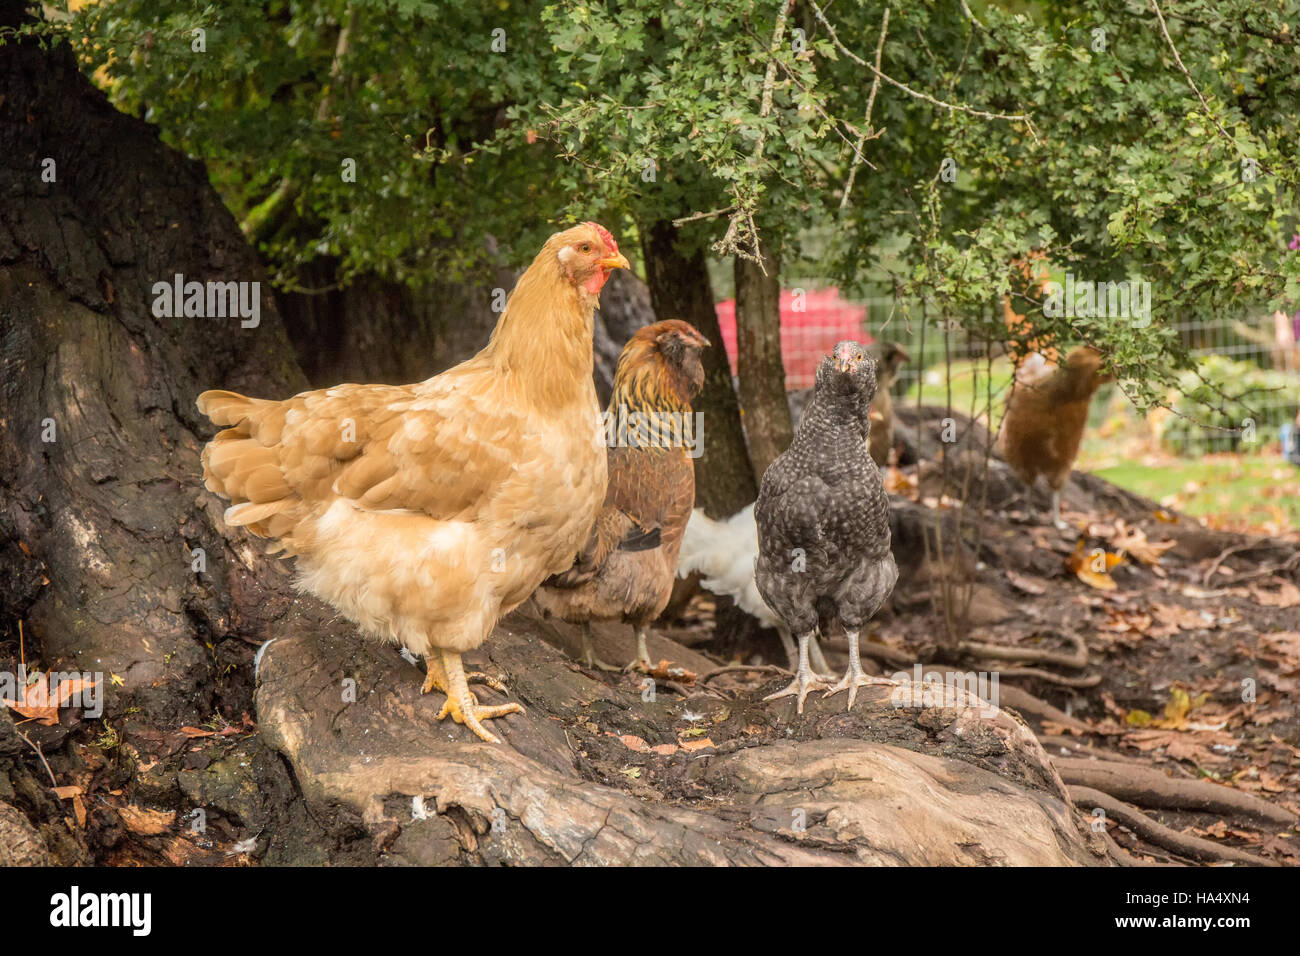 Free-ranging Buff Orpington, Red Laced Wyandotte, Cuckoo Maran and White Leghorn hens standing at the base of a large tree in Issaquah, Washington, US Stock Photo